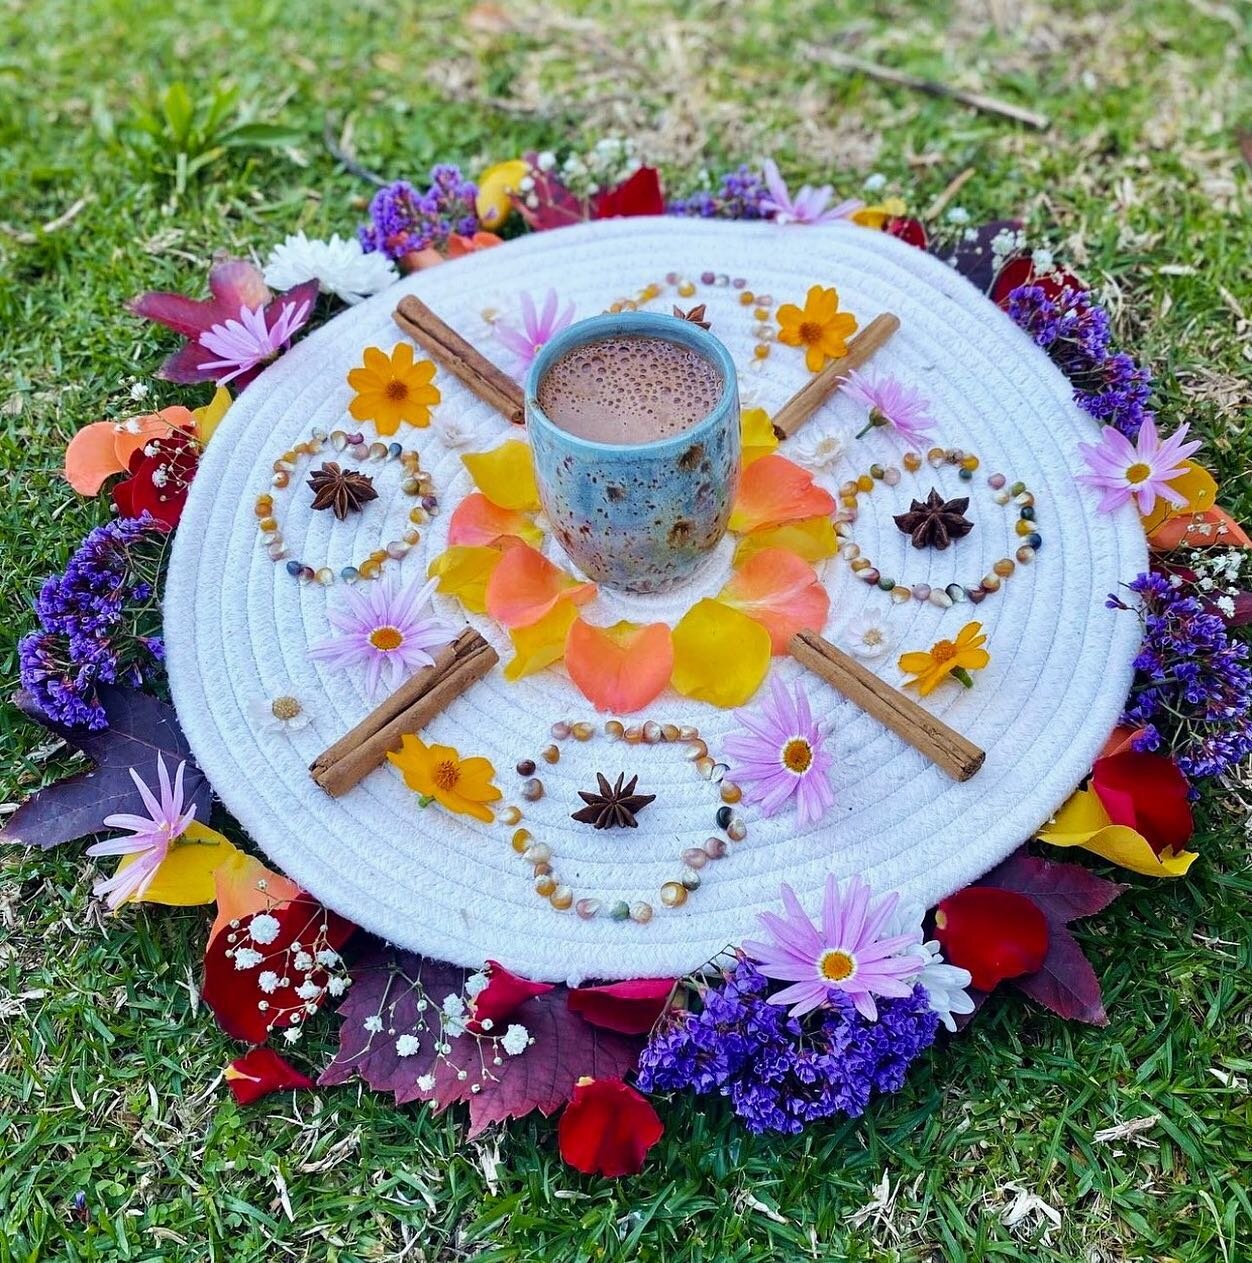 Stunning cacao mandala by @ladyjane.elizabeth - we can literally see the cacao fairies twirling around this magical setup! 🧚&zwj;♀️✨